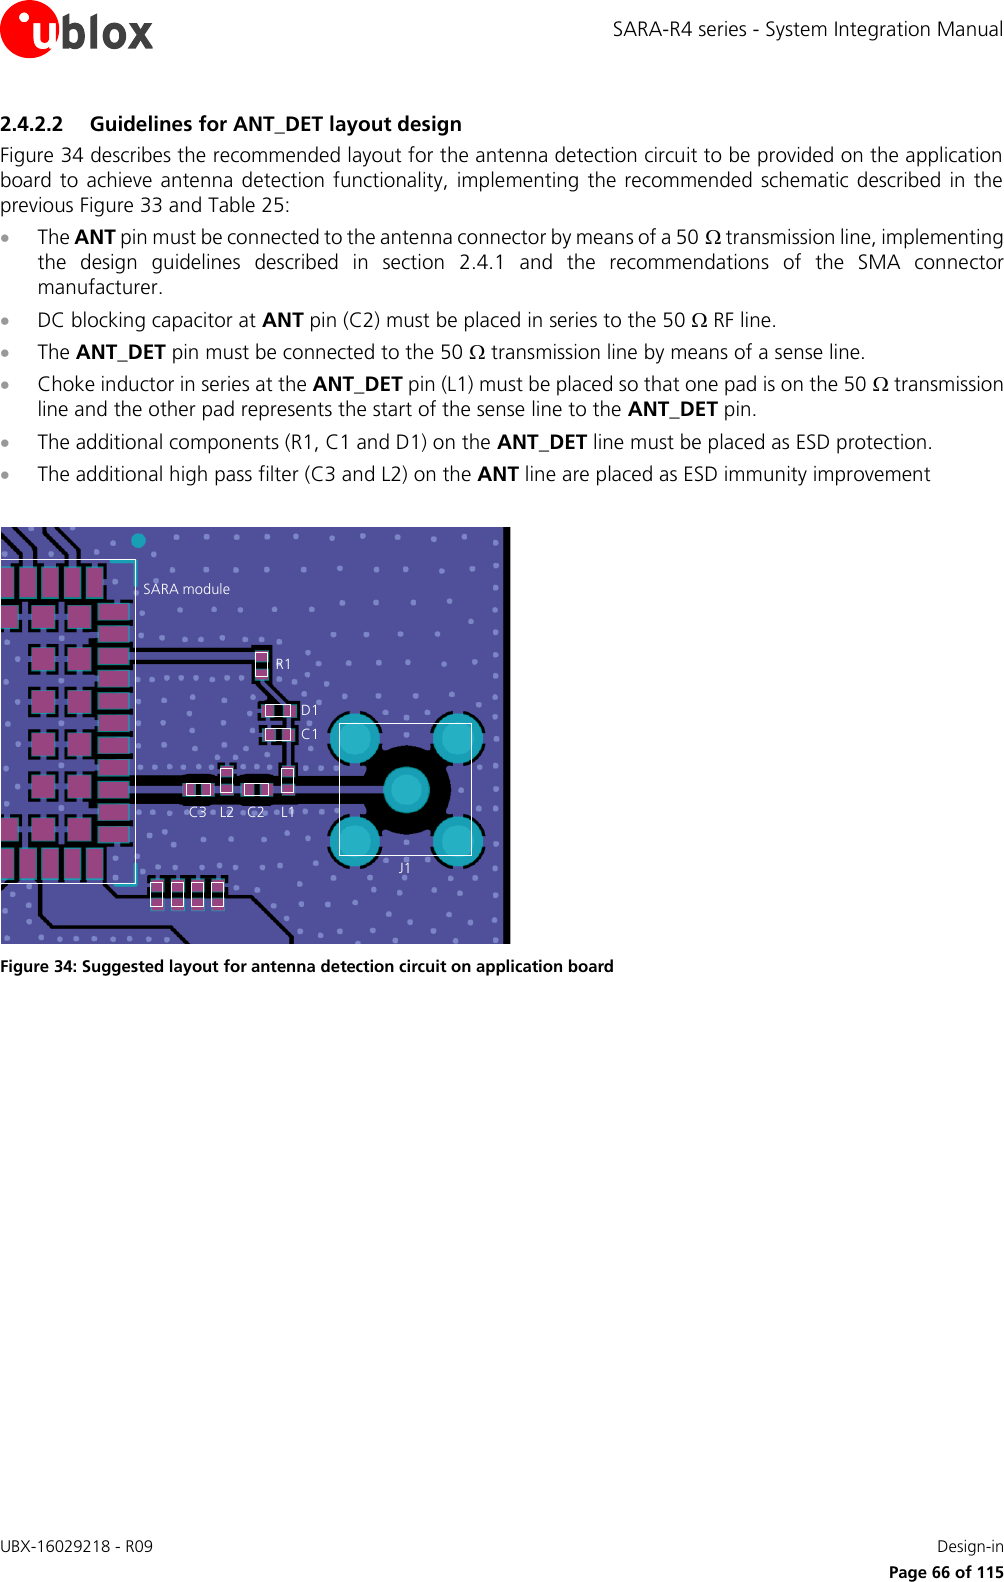 SARA-R4 series - System Integration Manual UBX-16029218 - R09    Design-in     Page 66 of 115 2.4.2.2 Guidelines for ANT_DET layout design Figure 34 describes the recommended layout for the antenna detection circuit to be provided on the application board to achieve antenna detection functionality,  implementing the recommended schematic  described in the previous Figure 33 and Table 25:  The ANT pin must be connected to the antenna connector by means of a 50  transmission line, implementing the  design  guidelines  described  in  section  2.4.1  and  the  recommendations  of  the  SMA  connector manufacturer.  DC blocking capacitor at ANT pin (C2) must be placed in series to the 50  RF line.  The ANT_DET pin must be connected to the 50  transmission line by means of a sense line.  Choke inductor in series at the ANT_DET pin (L1) must be placed so that one pad is on the 50  transmission line and the other pad represents the start of the sense line to the ANT_DET pin.  The additional components (R1, C1 and D1) on the ANT_DET line must be placed as ESD protection.  The additional high pass filter (C3 and L2) on the ANT line are placed as ESD immunity improvement  SARA moduleC2R1D1C1L1J1C3 L2 Figure 34: Suggested layout for antenna detection circuit on application board   